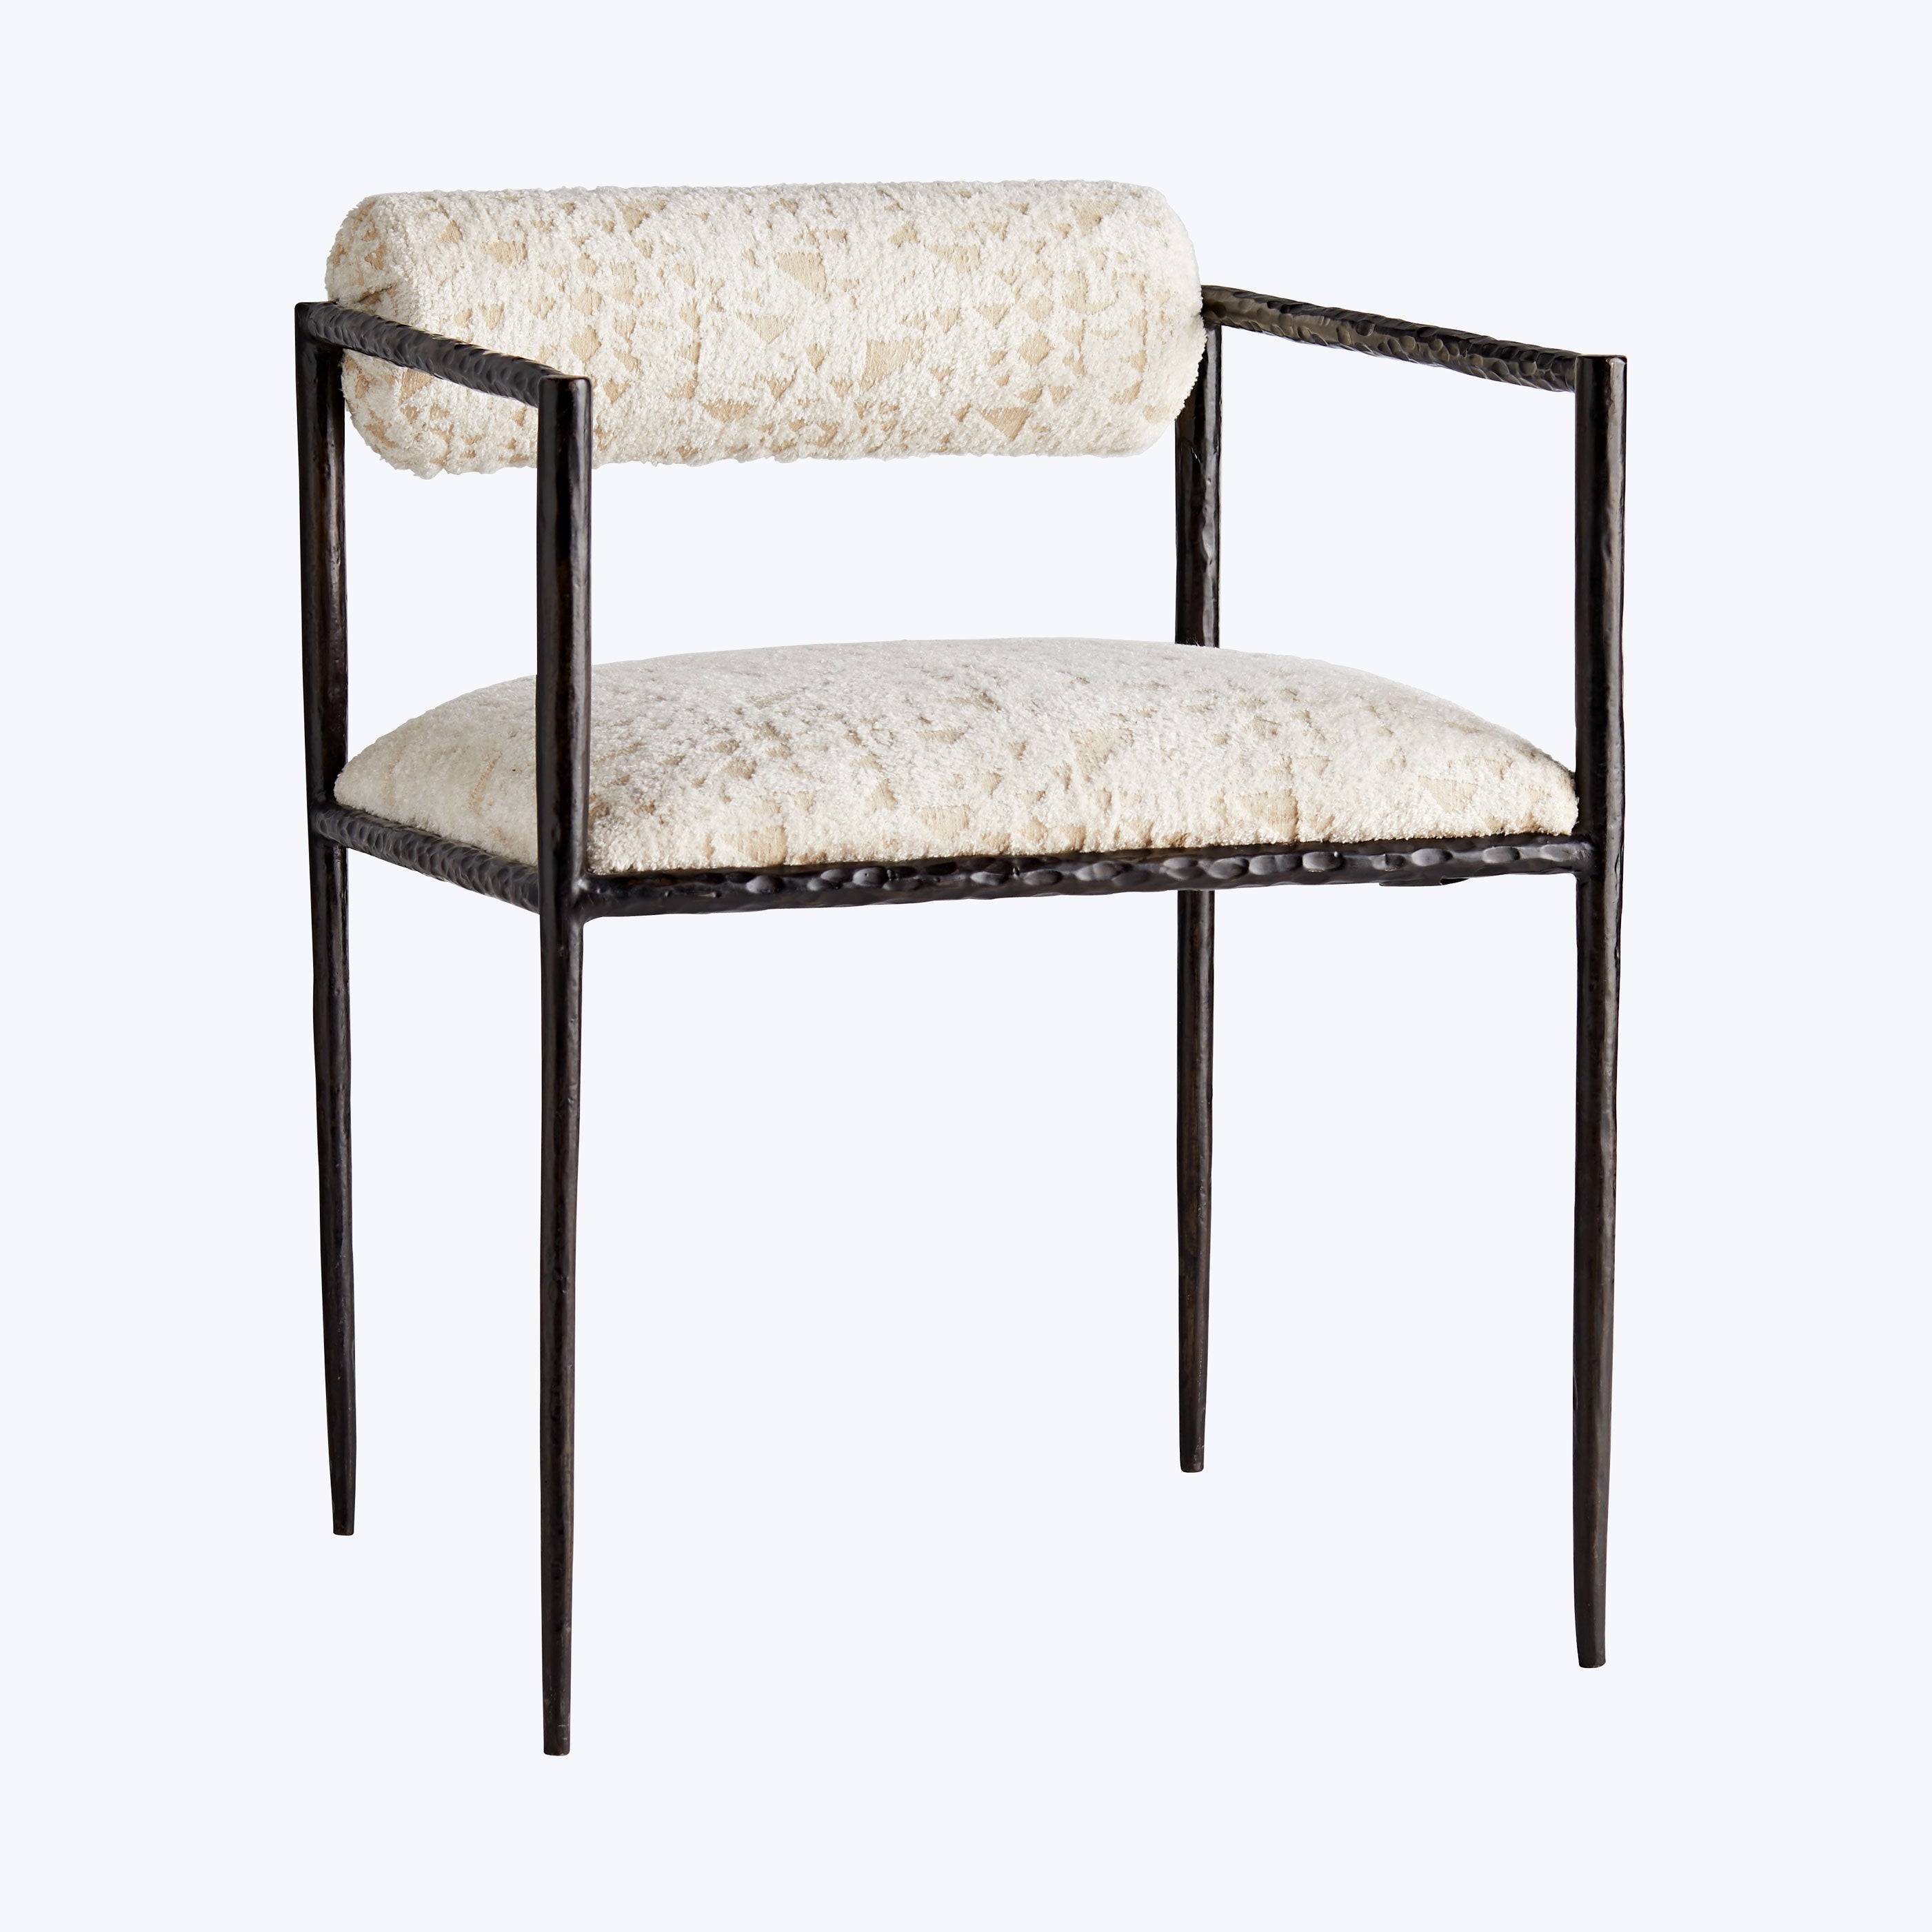 Modern chair with industrial metal frame and plush upholstered seat